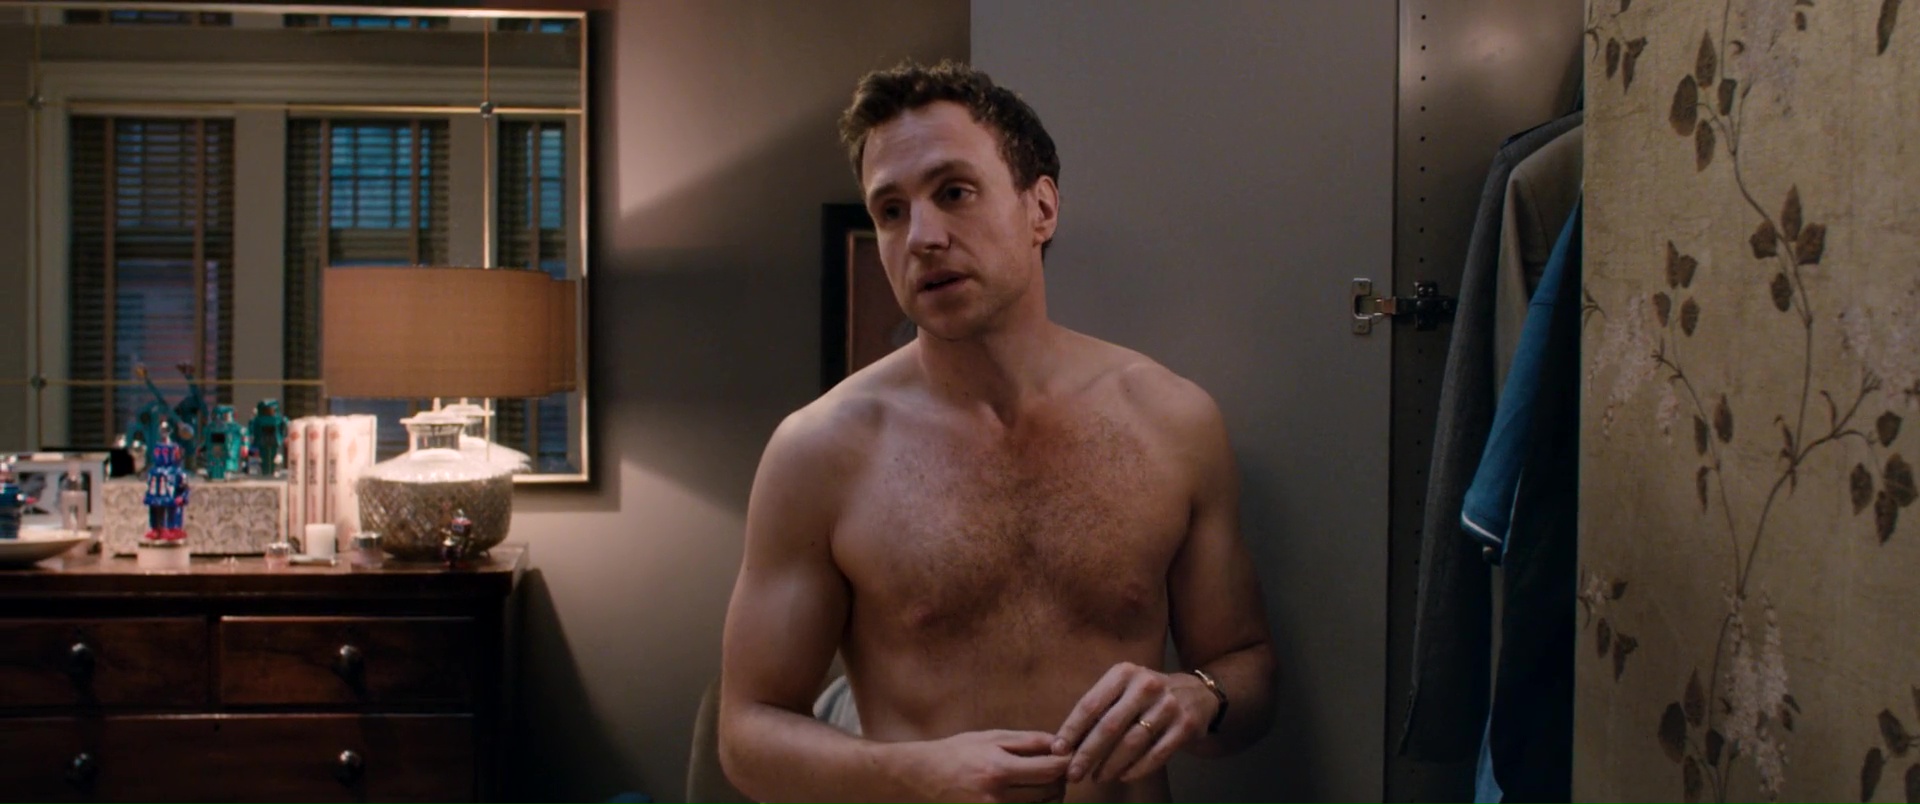 Rafe Spall nude in I Give It A Year.